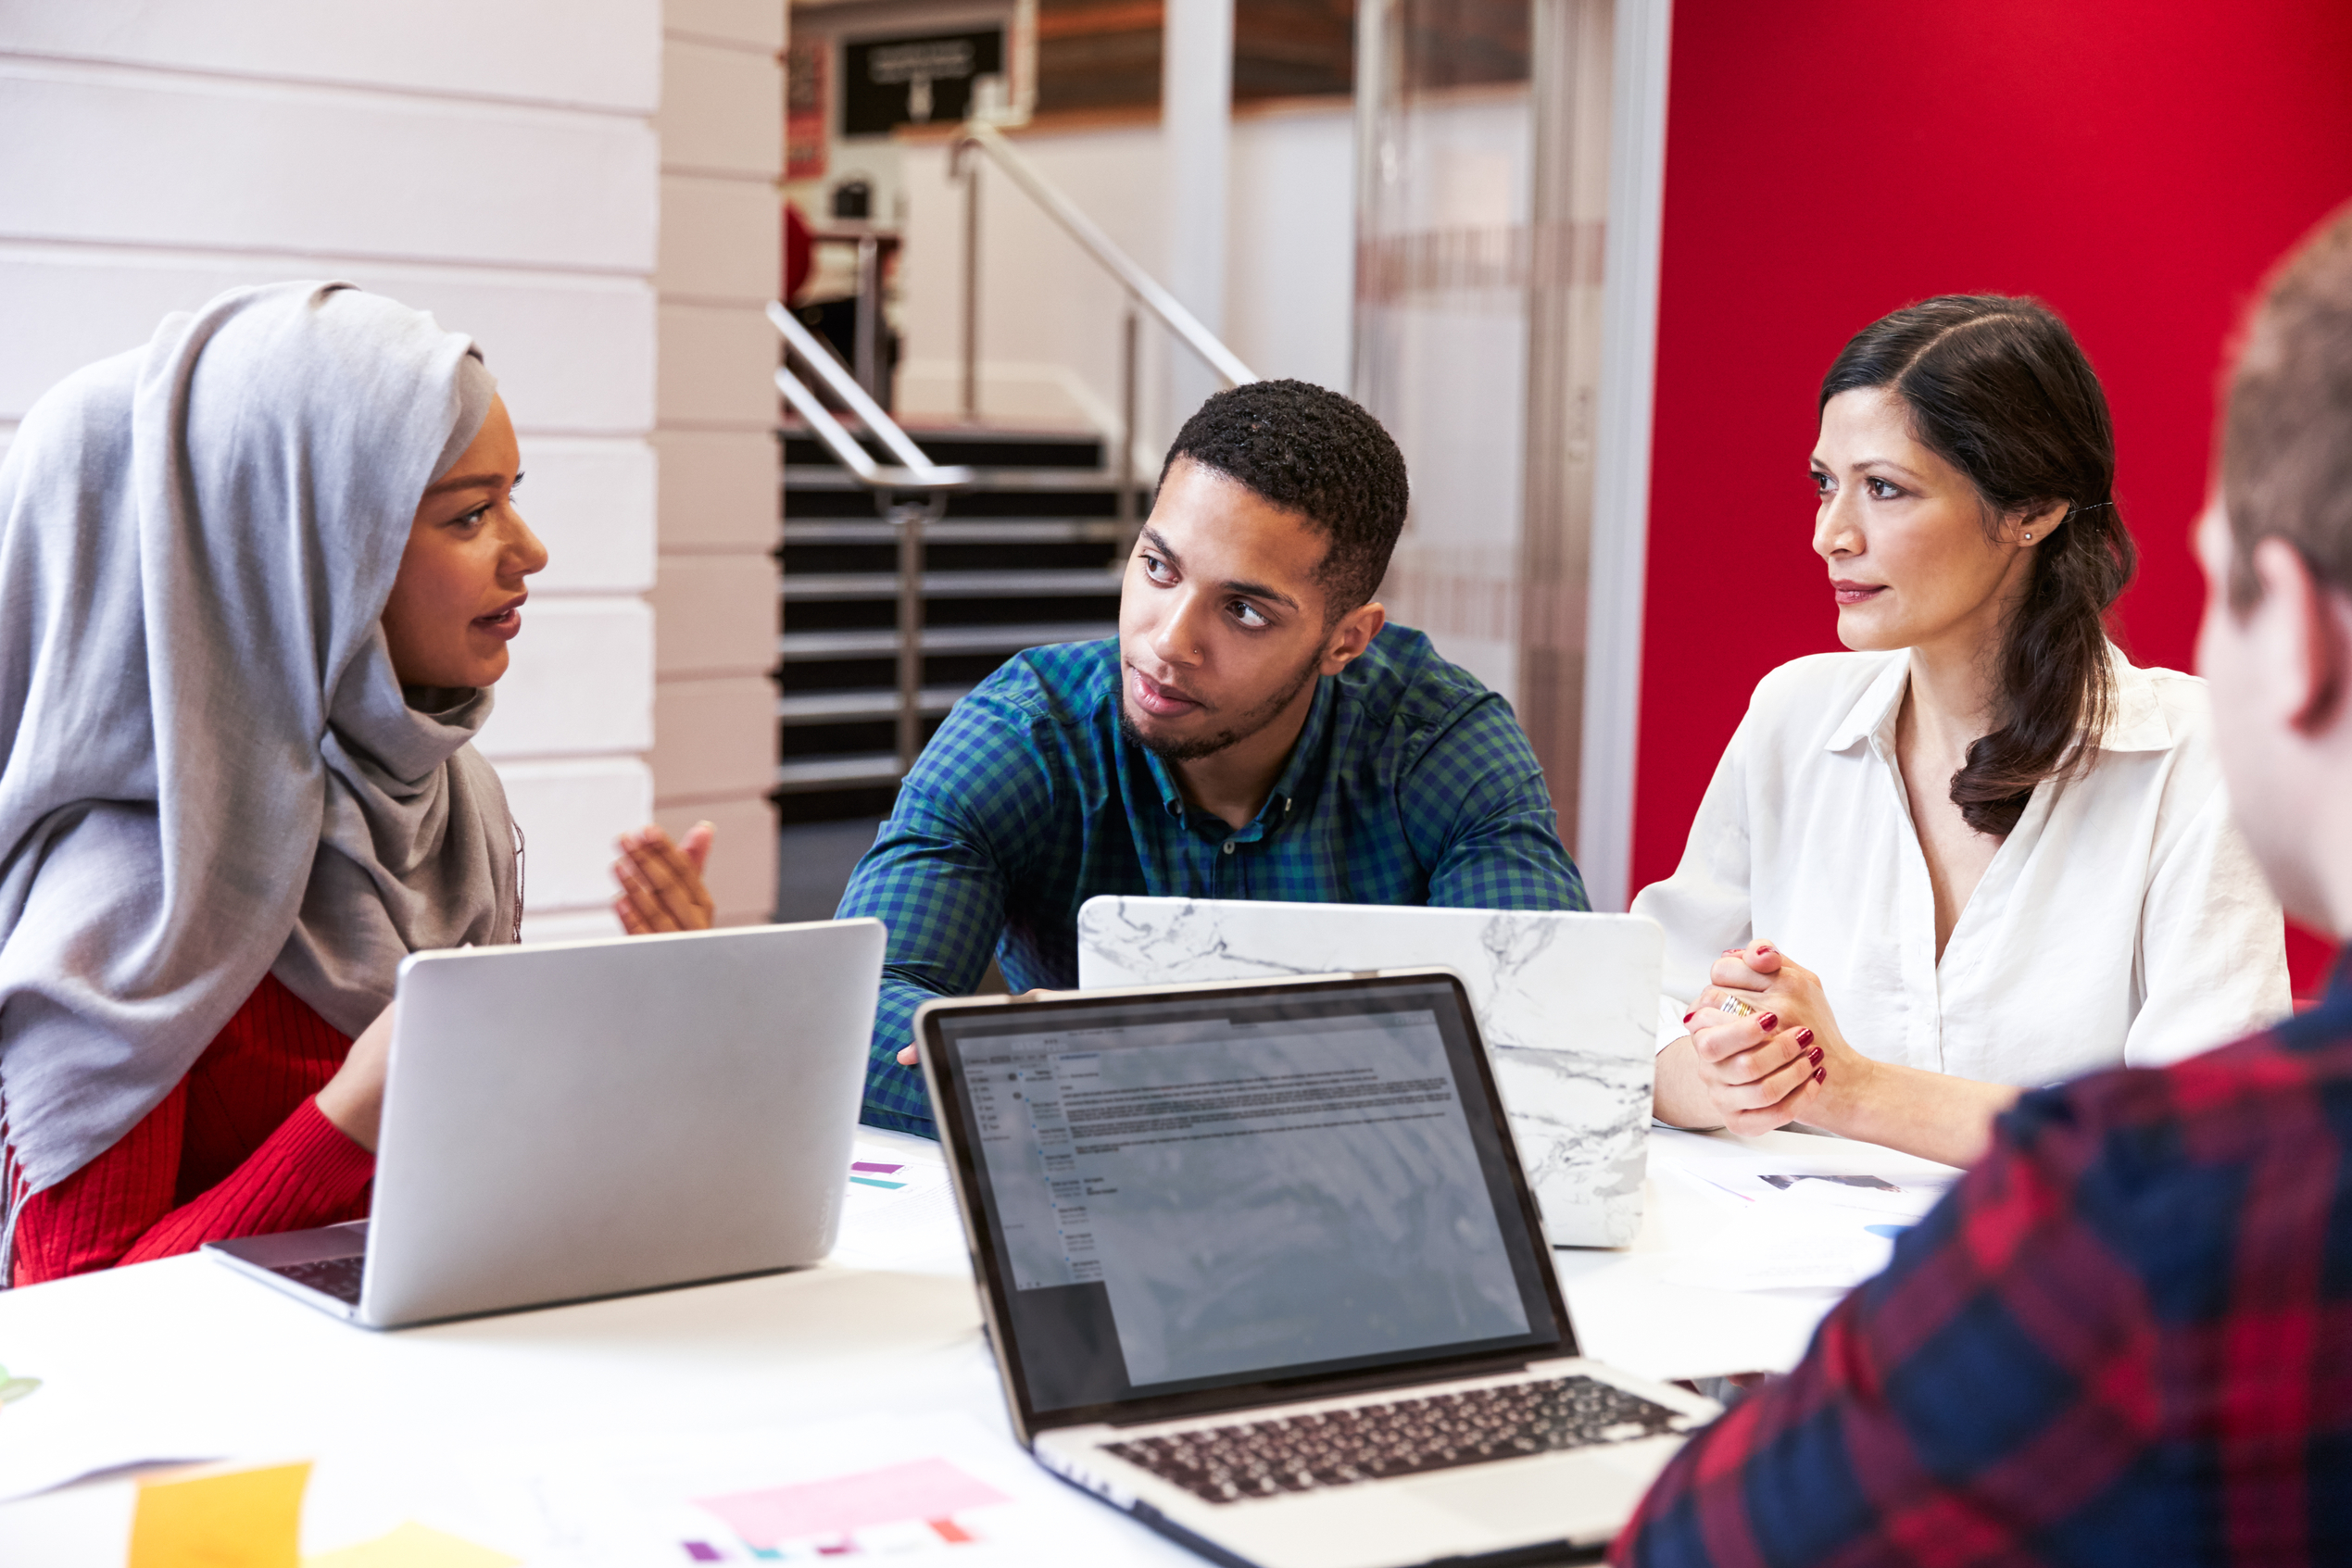 Cisco Networking Academy offers inclusive and equitable education to power global development